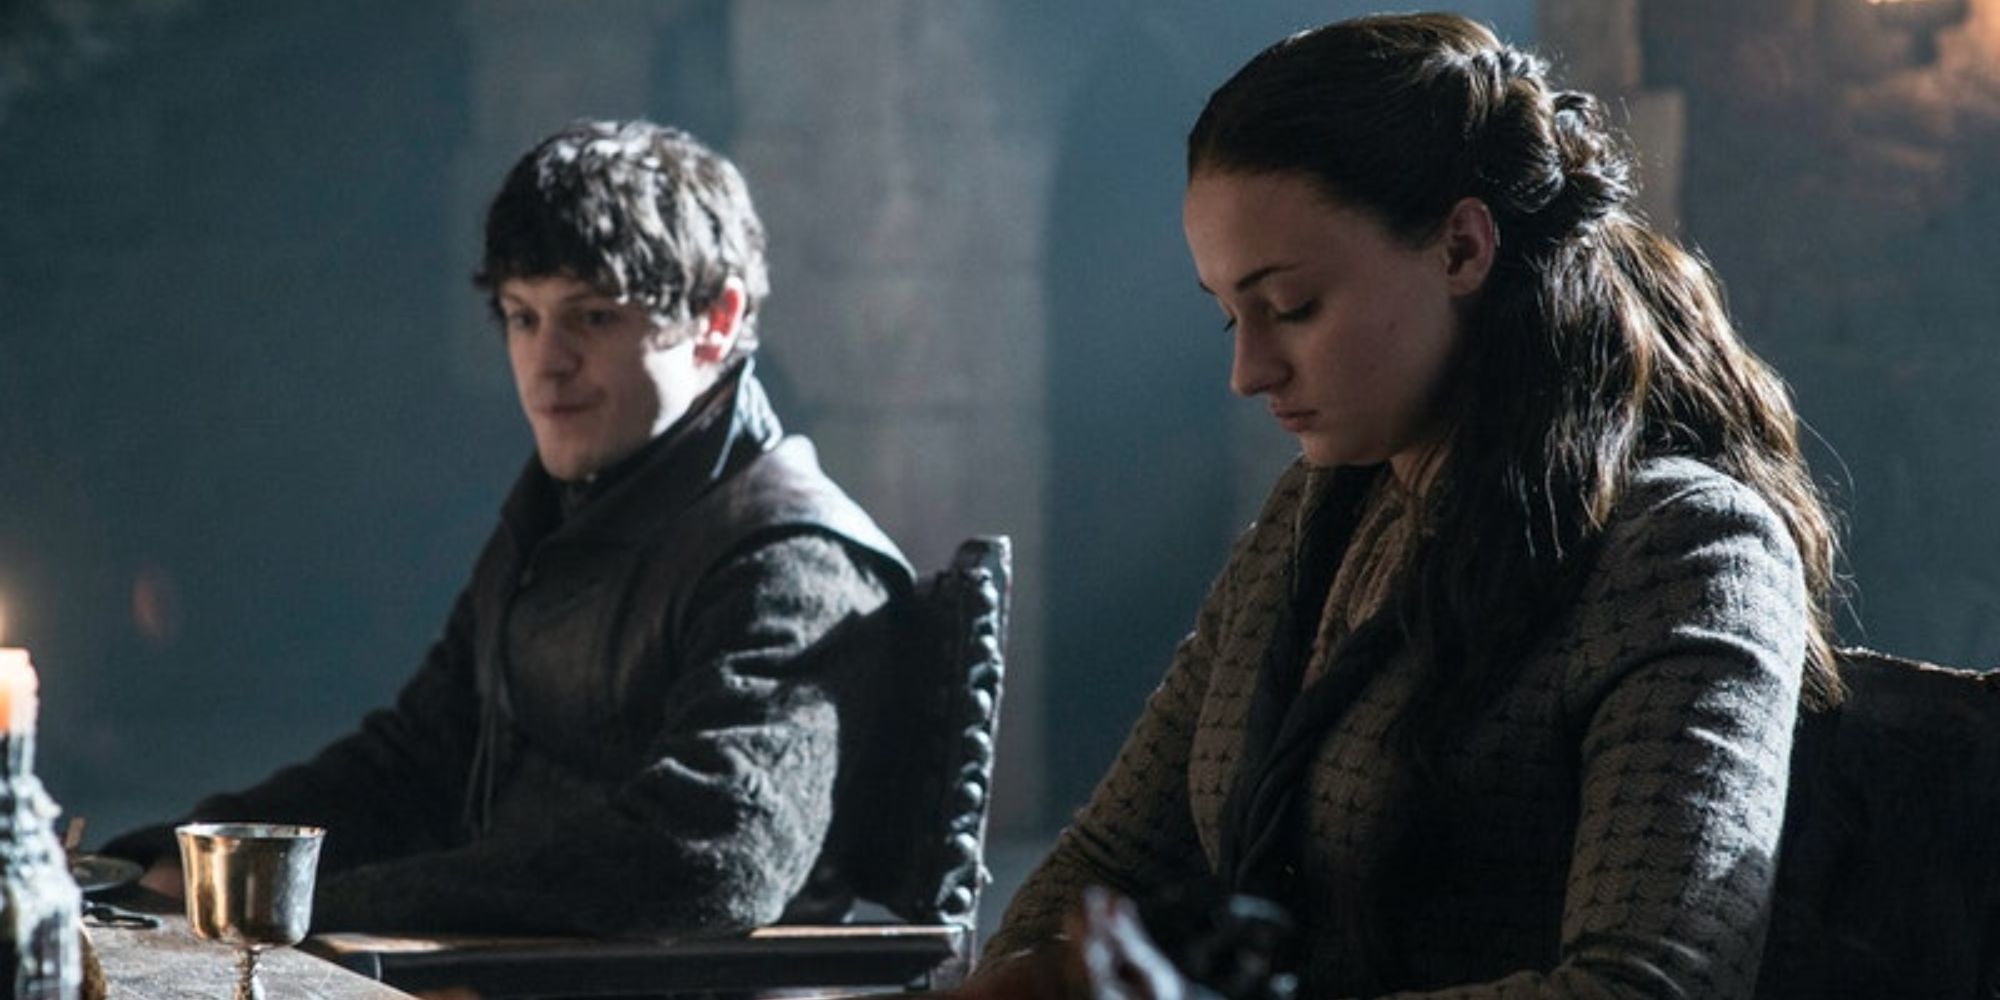 Iwan Rheon as Ramsay Bolton with Sophie Turner as Sansa-Stark in HBO's 'Game of Thrones'